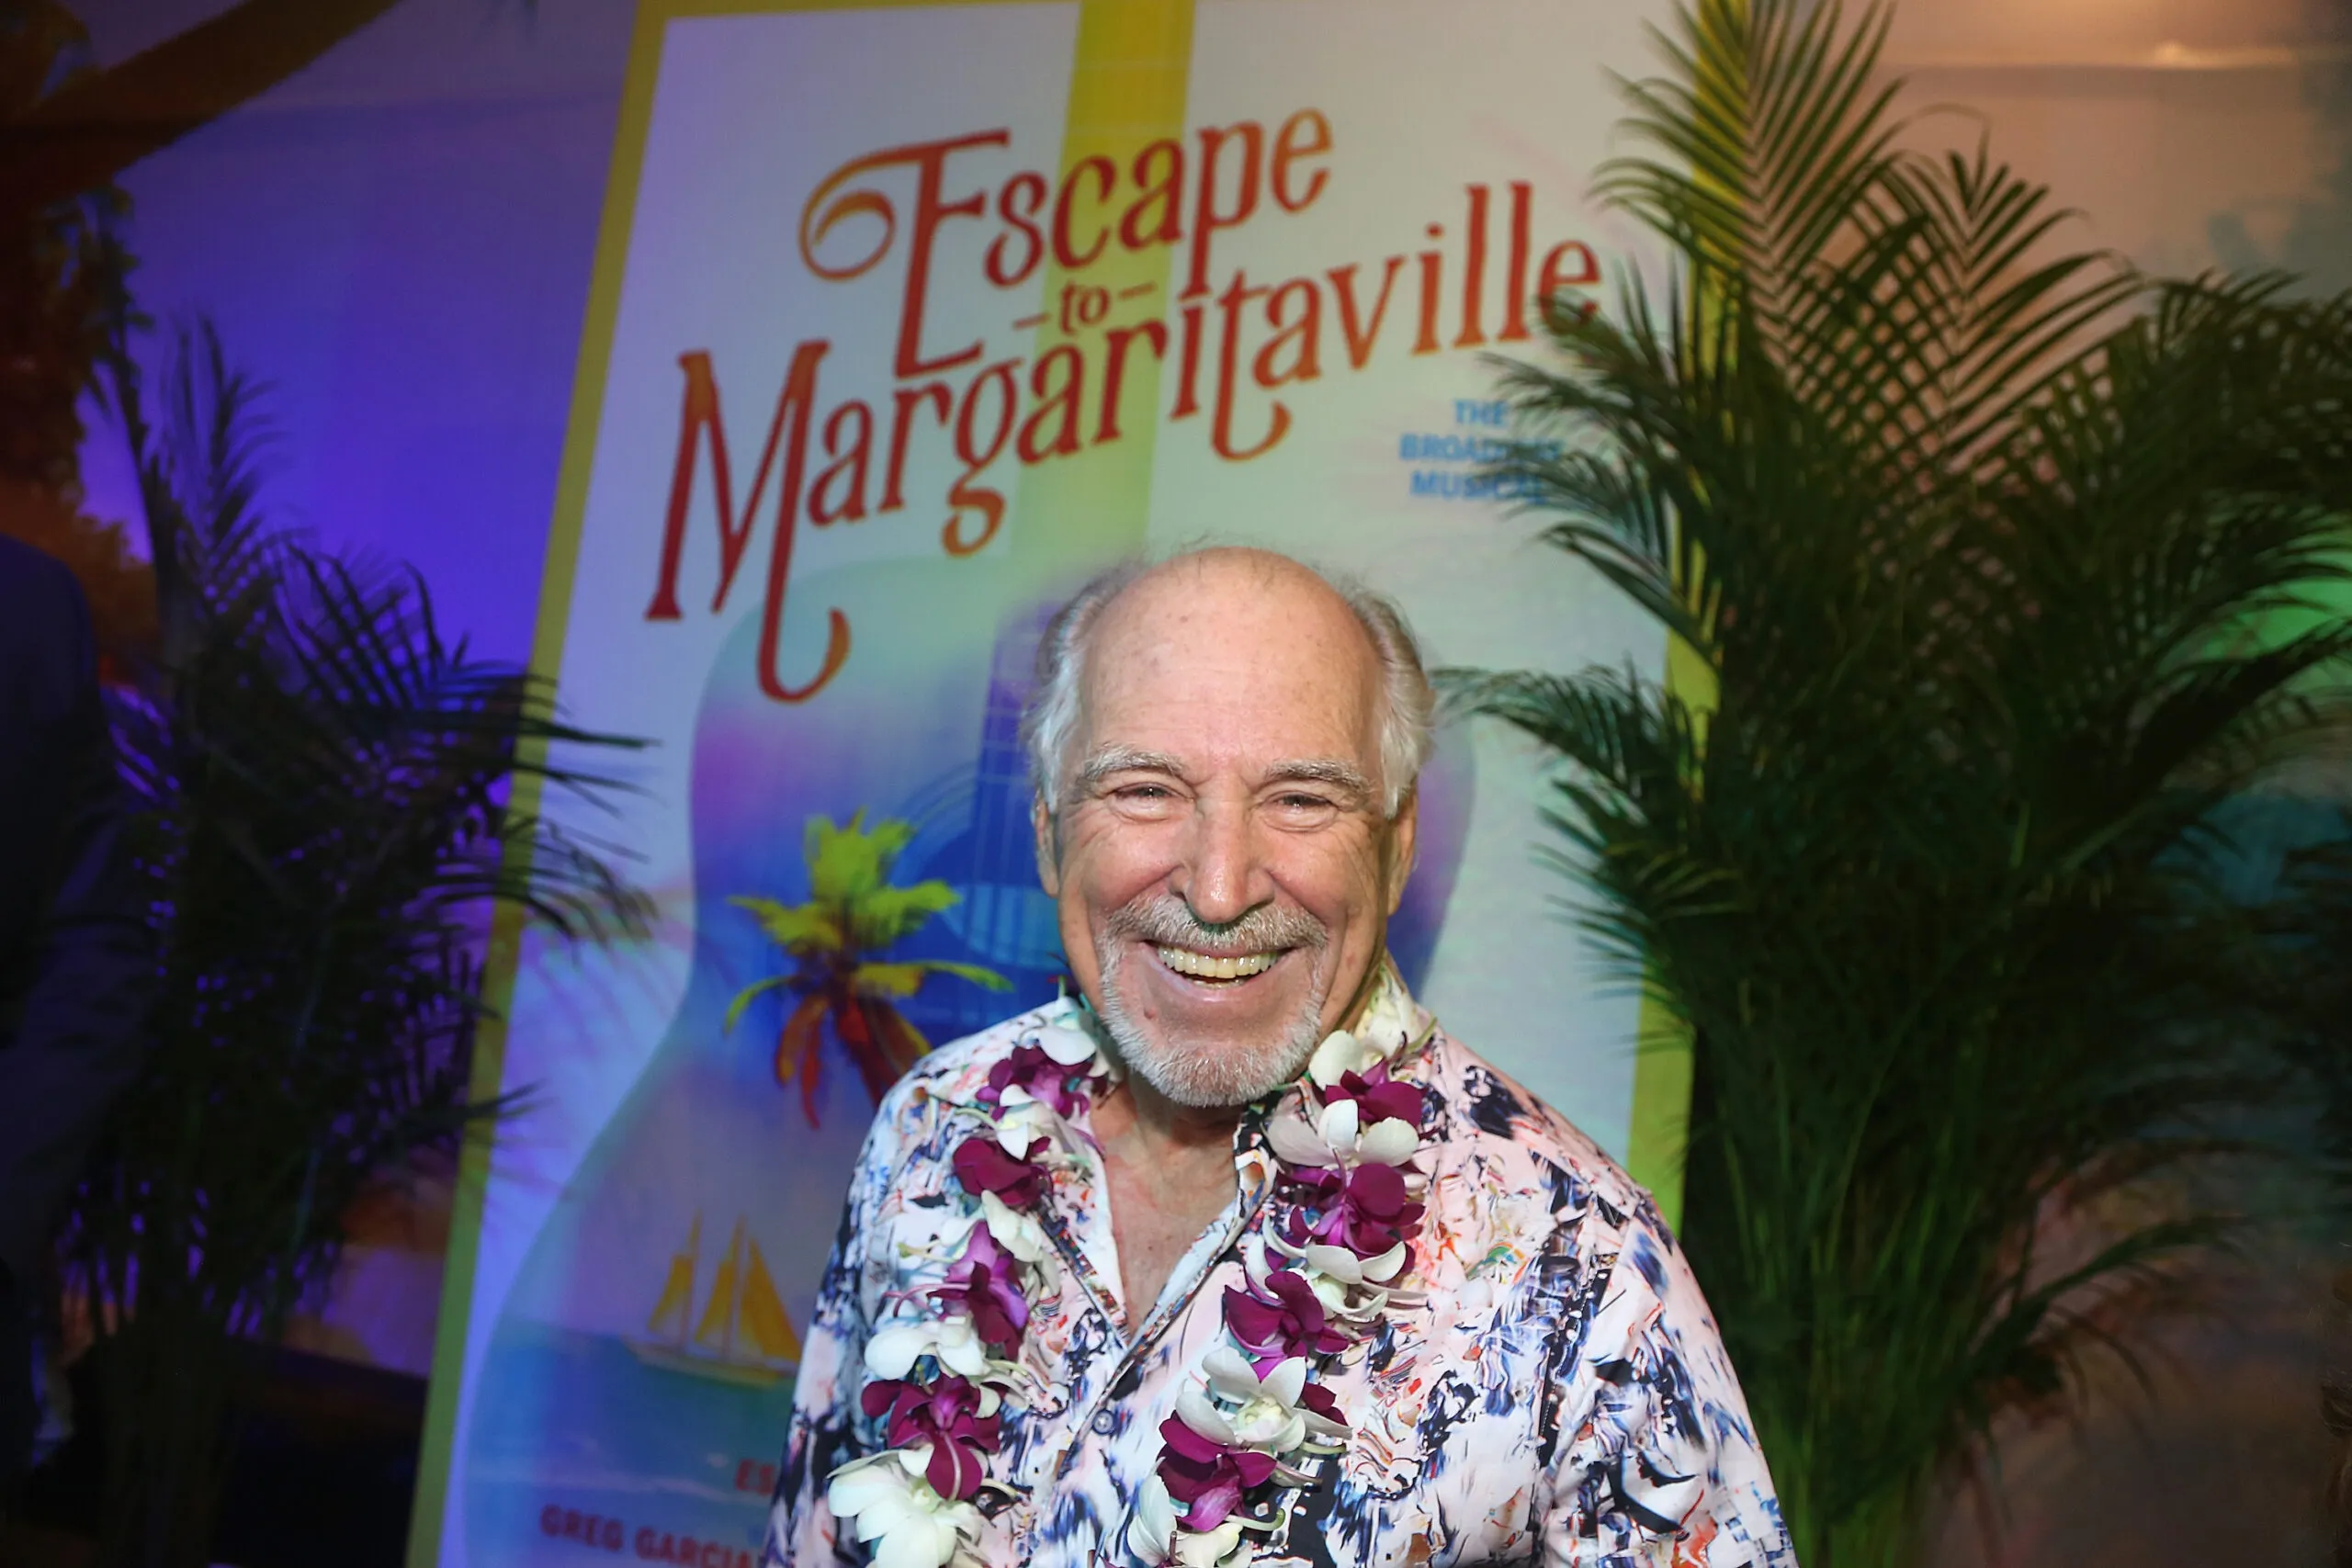 NEW YORK, NY - MARCH 15:  Jimmy Buffett arrives at the Opening Night of The Jimmy Buffett Musical "Escape To Margaritaville" on Broadway at The Marquis Theatre on March 15, 2018 in New York City.  (Photo by Bruce Glikas/Bruce Glikas/FilmMagic)